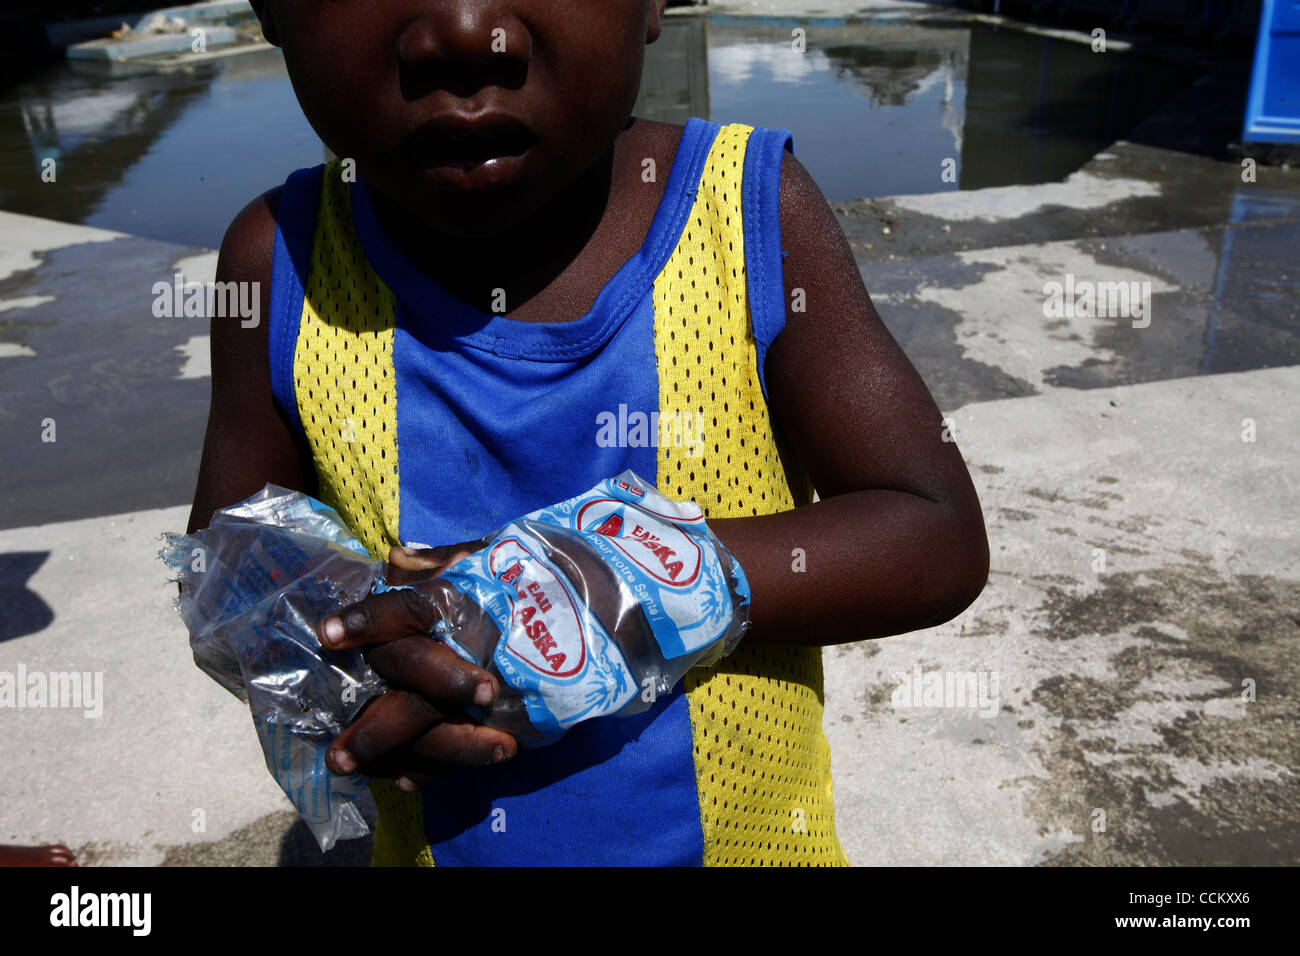 Nov 10, 2010 - Port-au-Prince, Haiti.A young resident of a tent city in the Cite Soleil area of Port-au-Prince, Haiti wears water bags as gloves in an effort, his older sisiter said, to avoid getting cholera, as other residents gather water from pipes just yards from portable toilets and flood water Stock Photo